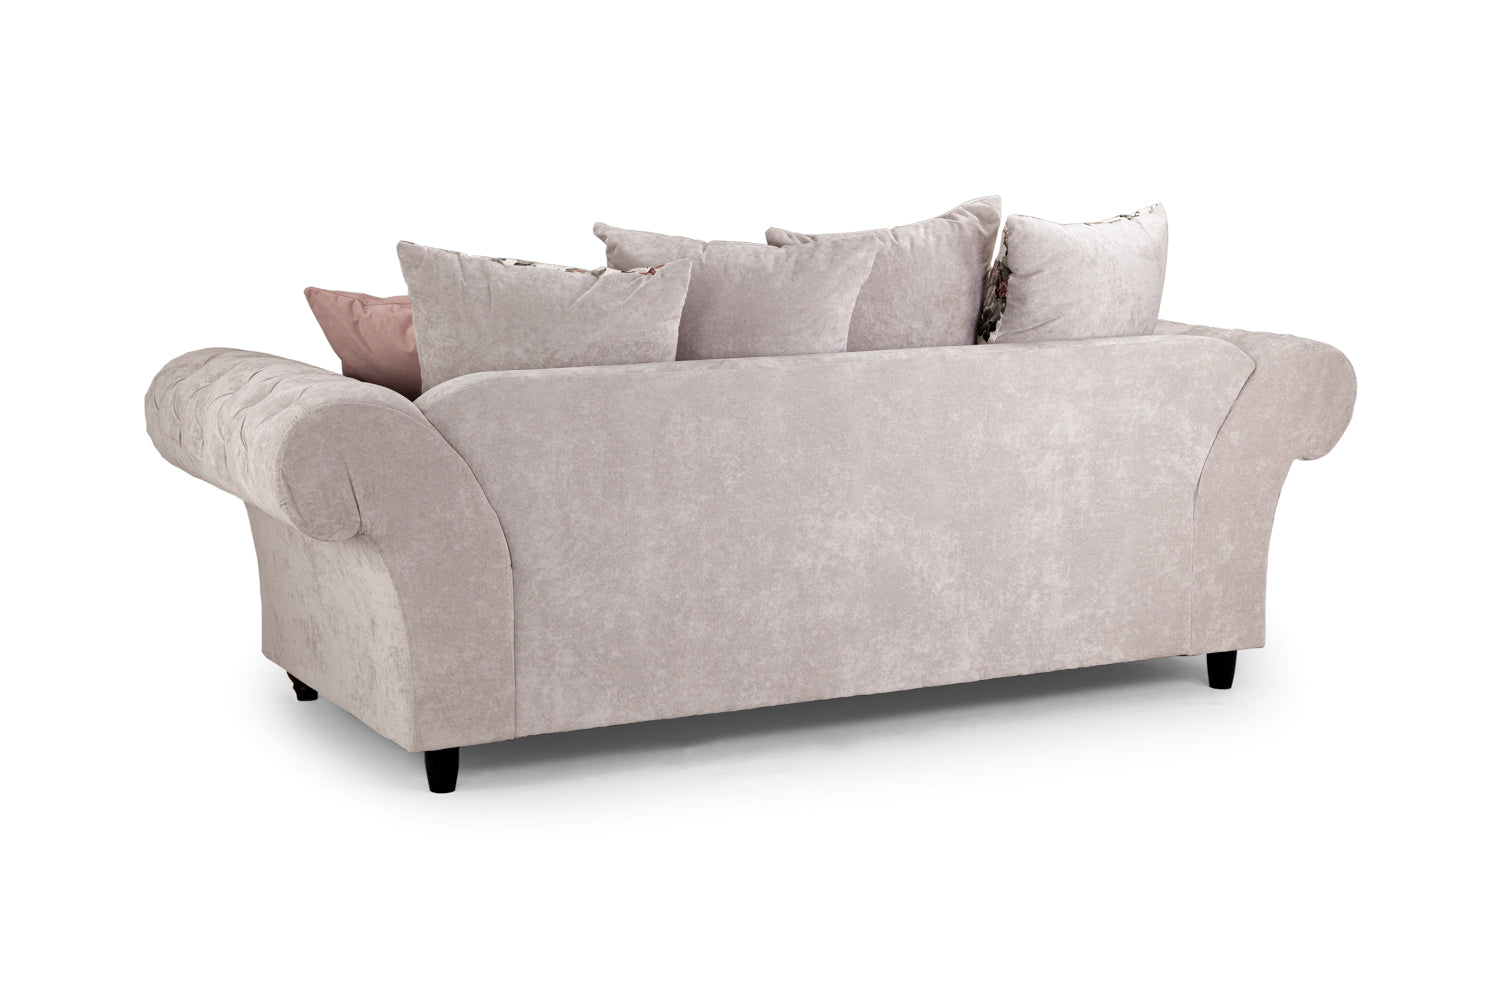 Roma Chesterfield Sofa Beige 3 Seater